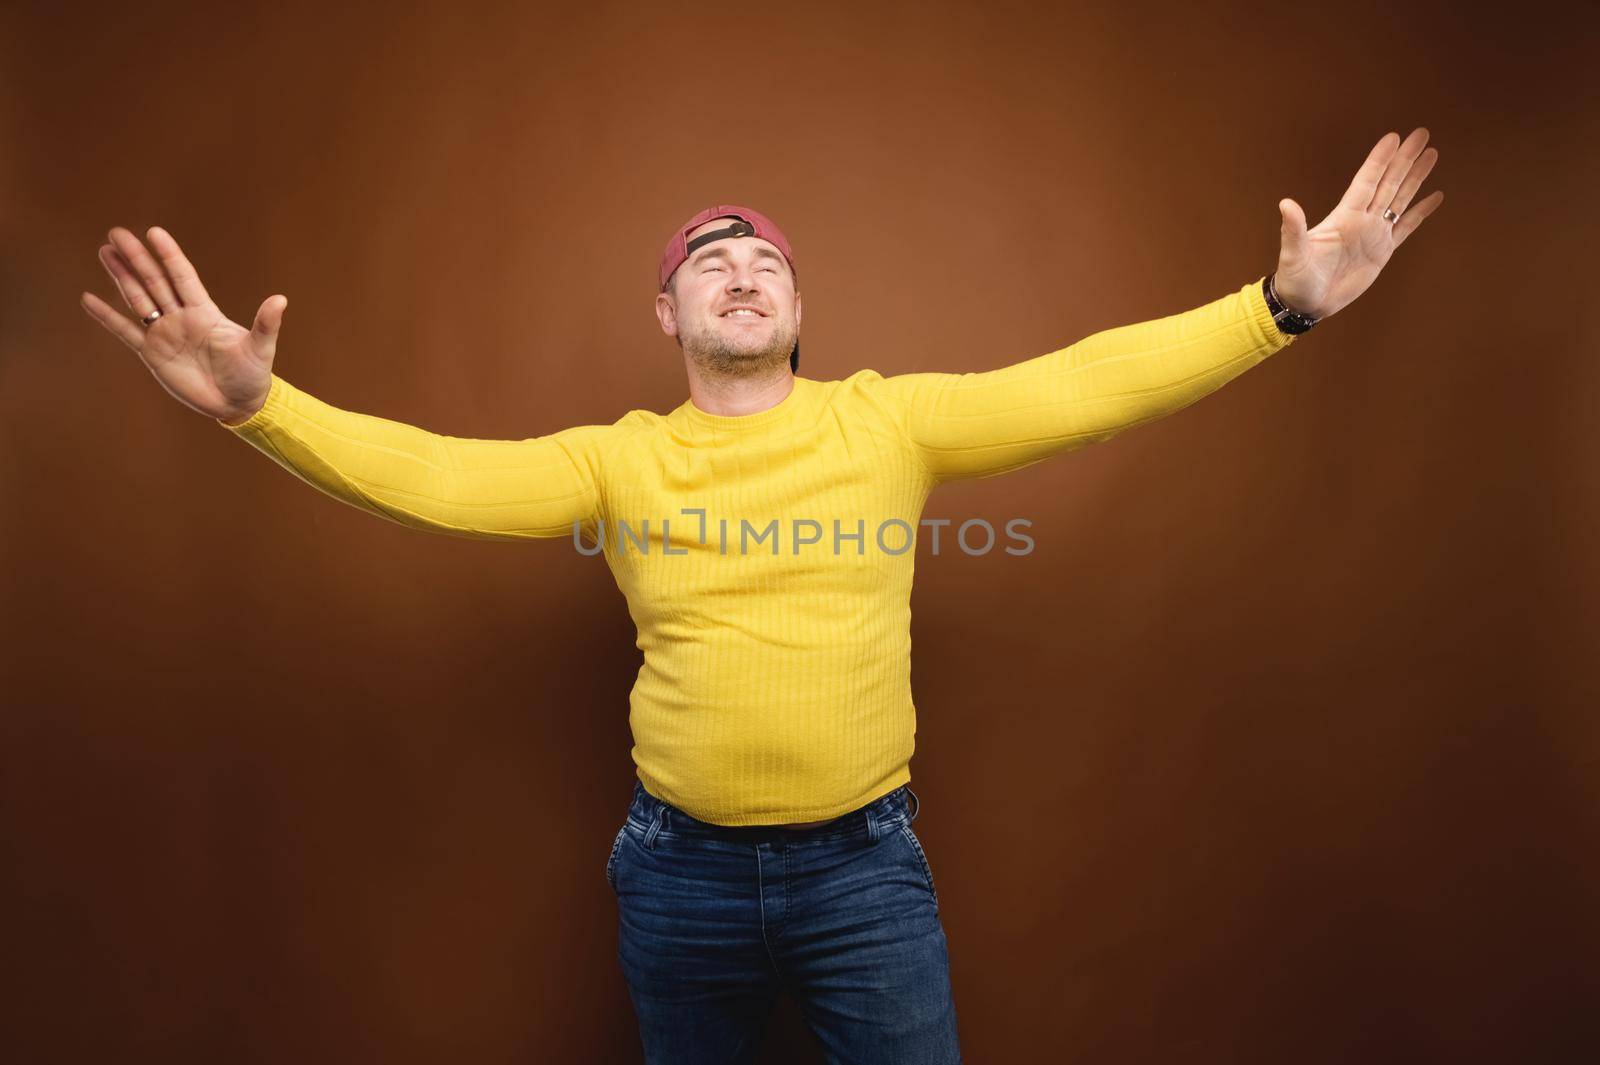 Caucasian plump middle-aged man dancing in the studio on a brown background. Studio portrait.